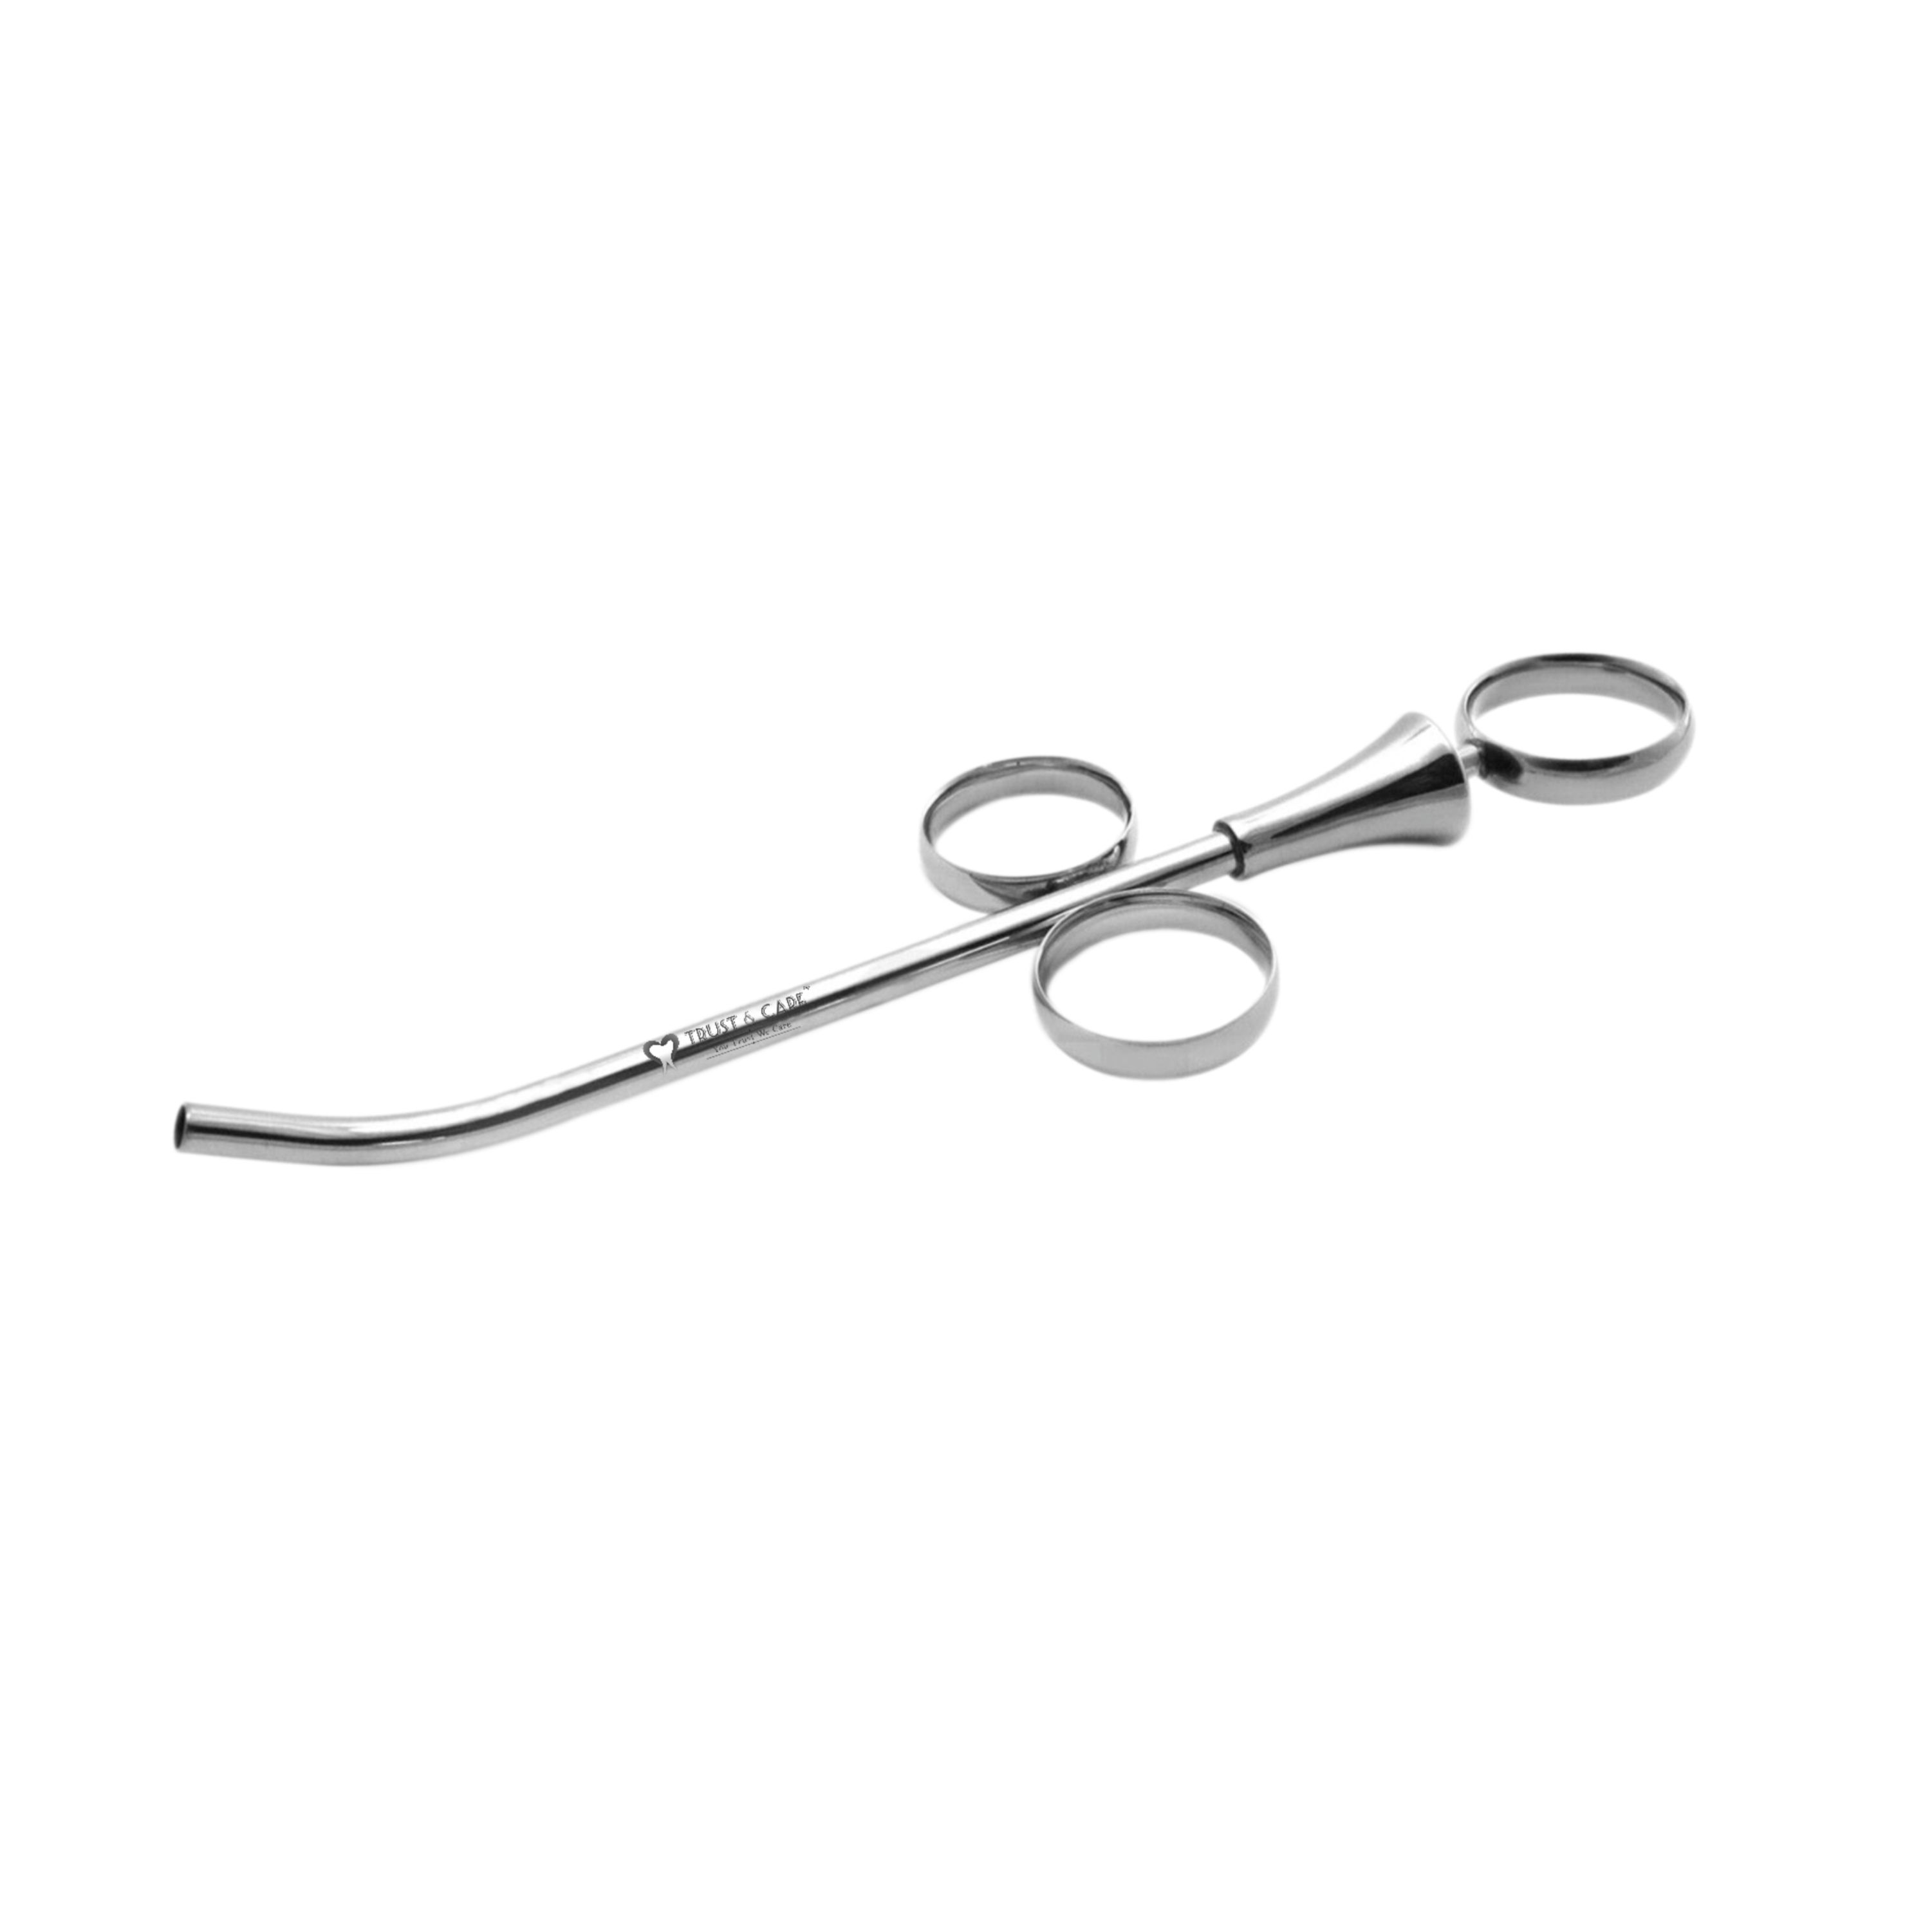 Trust & Care Bone Injector & Collector 2.5Mm Curved